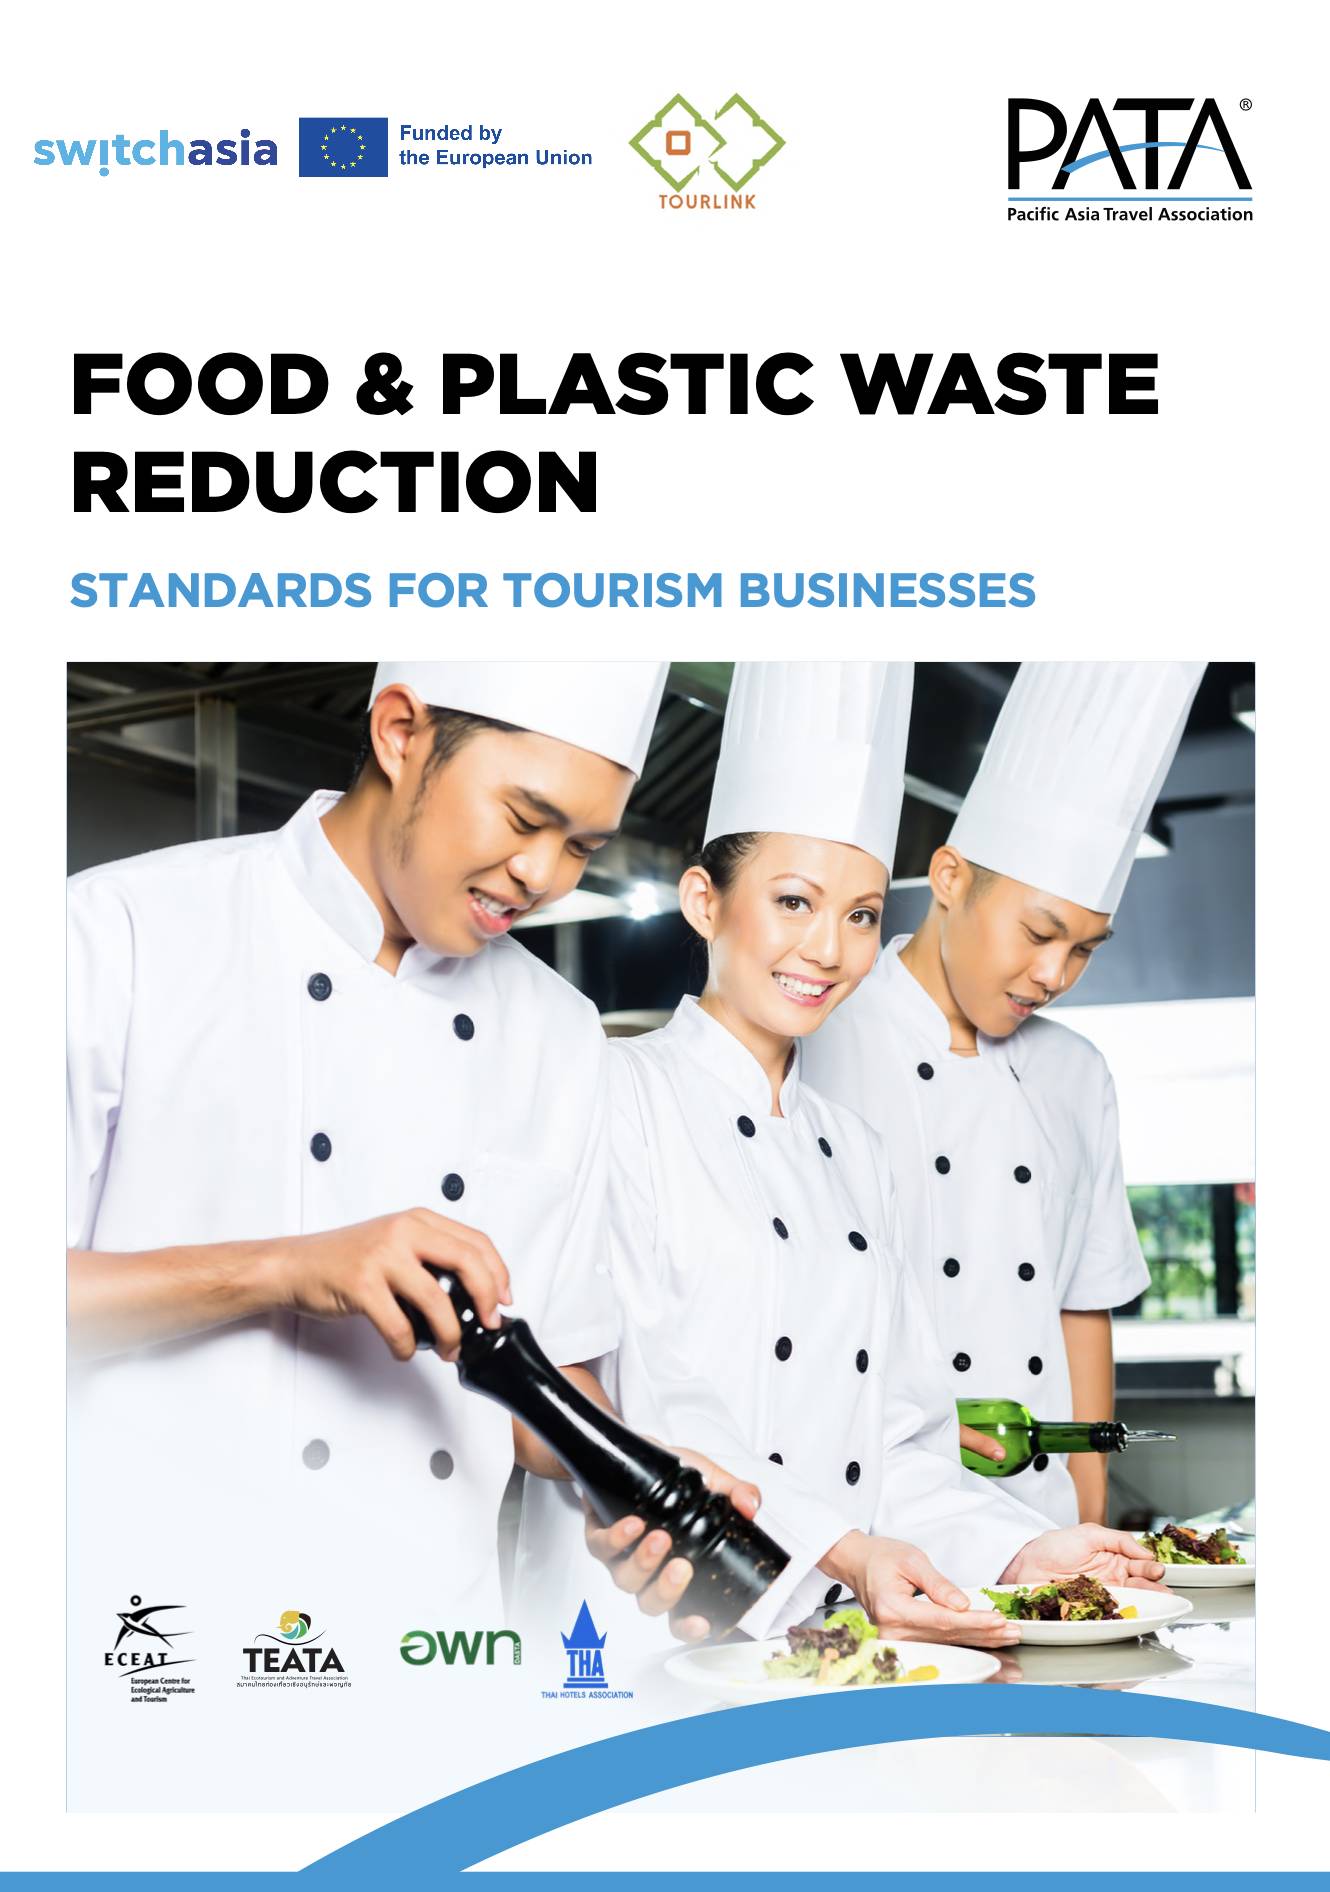 Food & Plastic Waste Reduction: Standards for Tourism Businesses